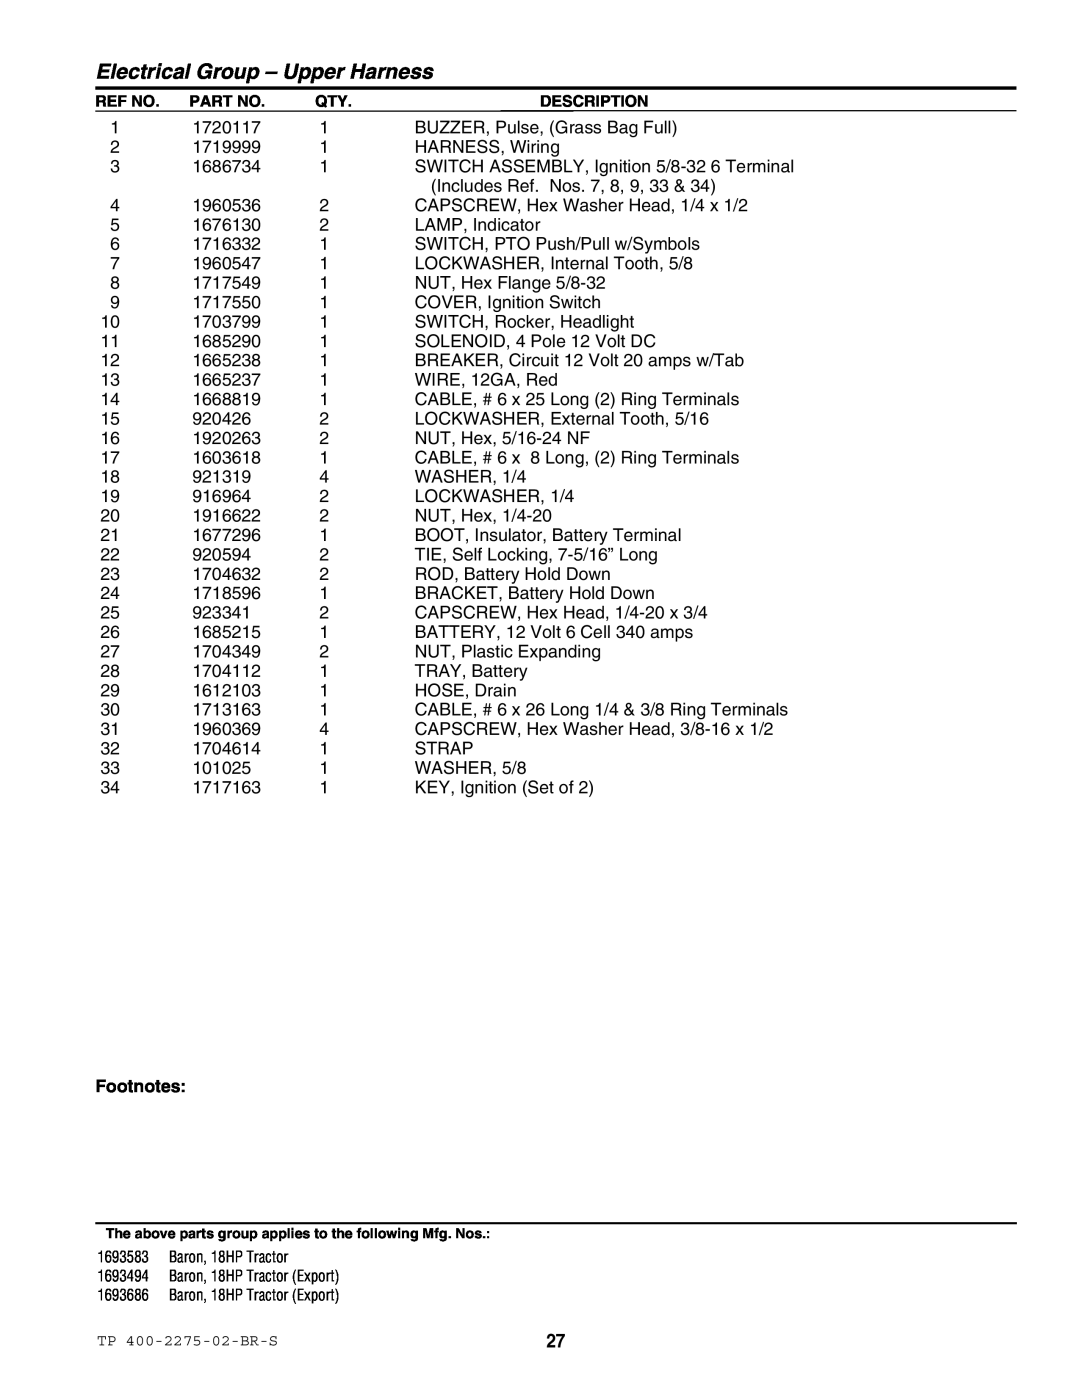 Massey Ferguson L&G 1693583 manual Electrical Group - Upper Harness, Footnotes 